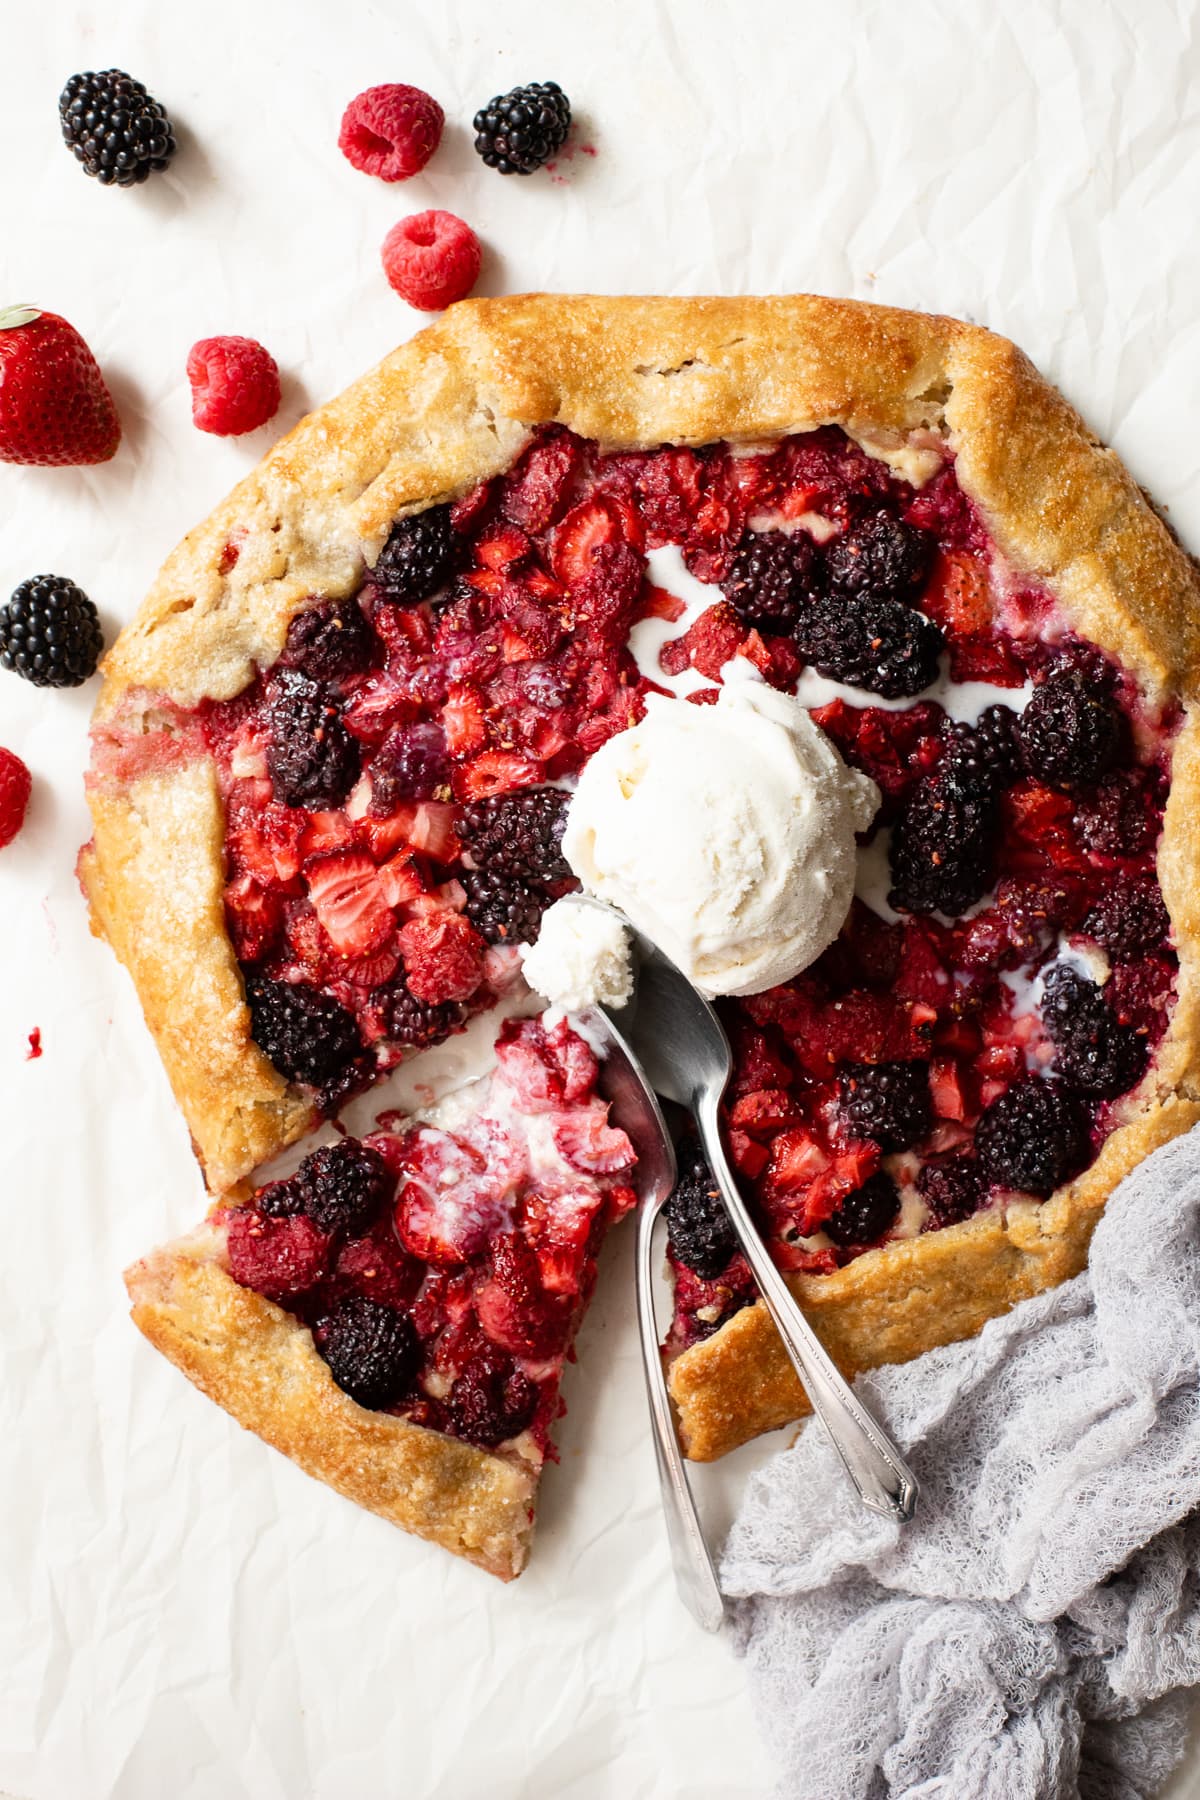 A sliced galette topped with a scoop of ice cream and surrounded by fresh berries.